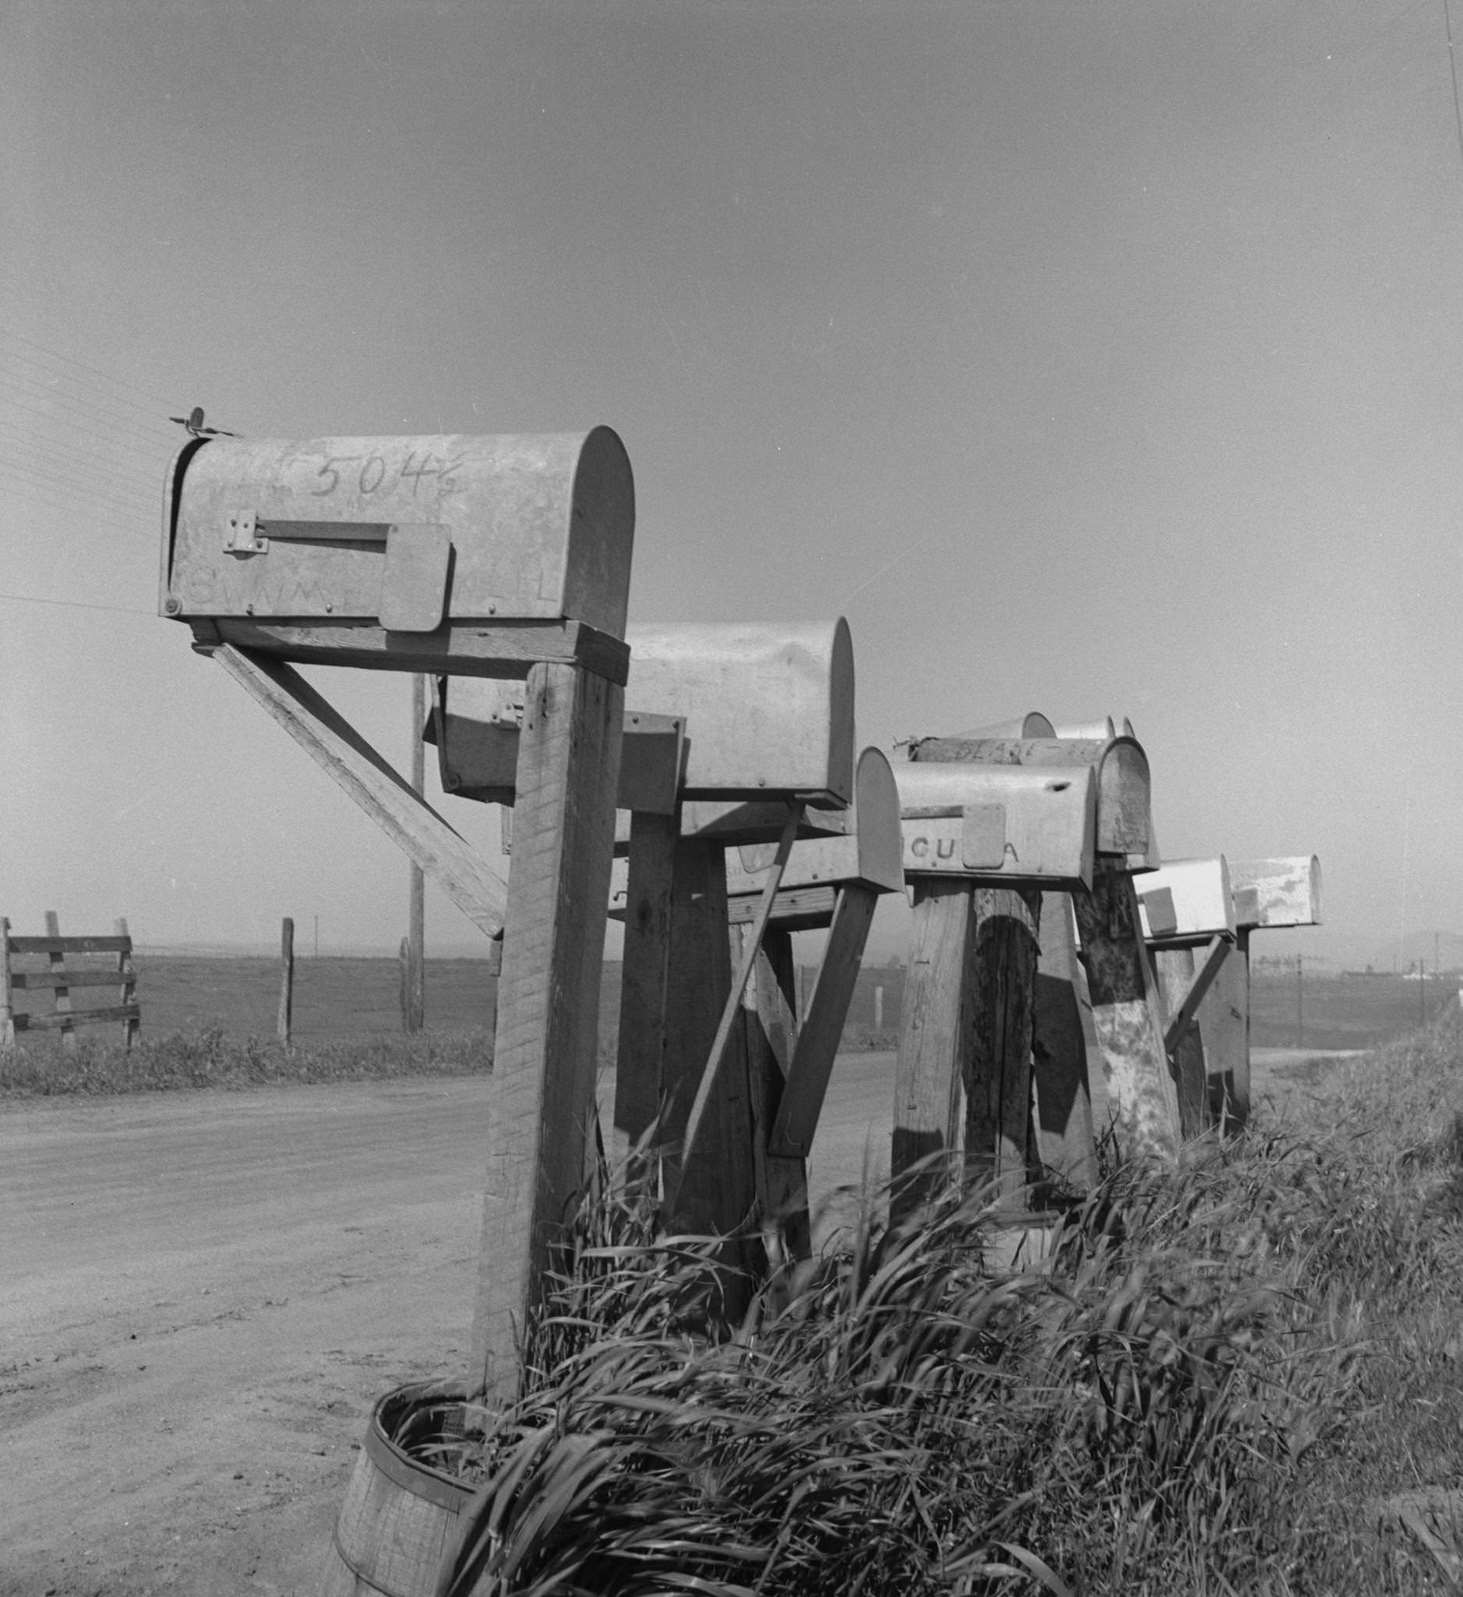 Mail boxes of lettuce workers. Settlement on outskirts of Salinas, California 1939